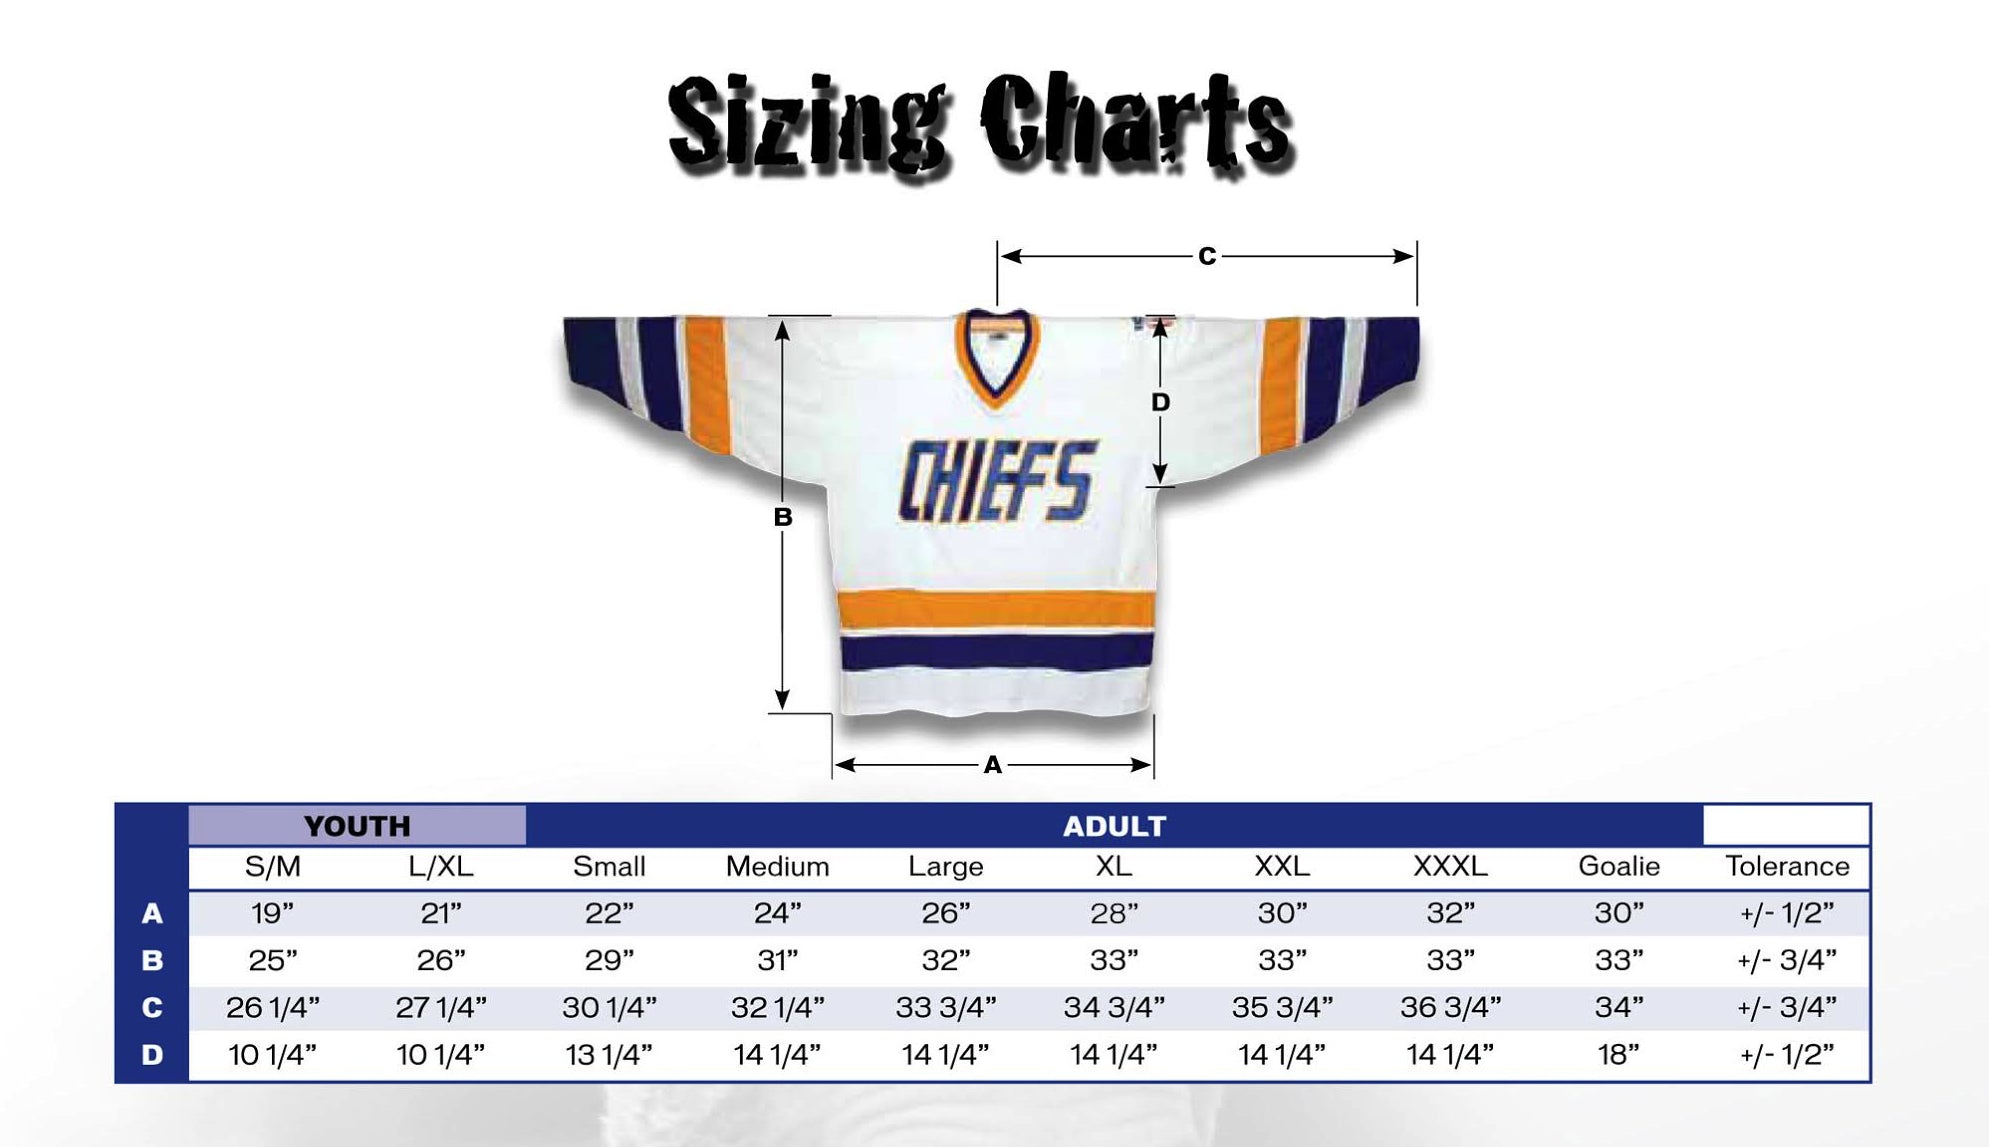 Charlestown Chiefs Home White Adult Jersey (Clearance)